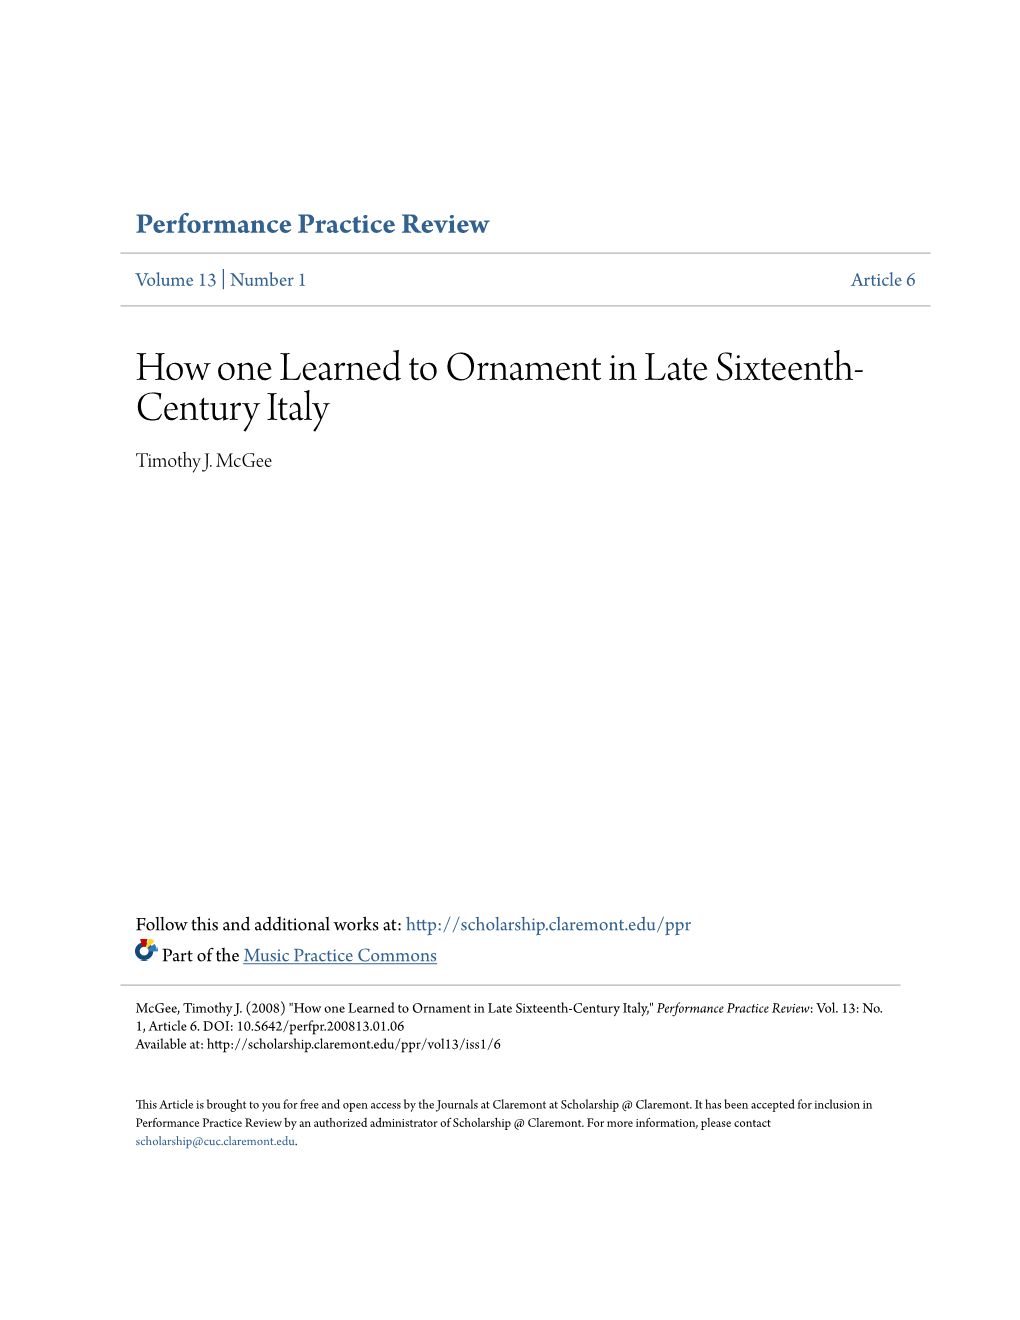 How One Learned to Ornament in Late Sixteenth-Century Italy," Performance Practice Review: Vol